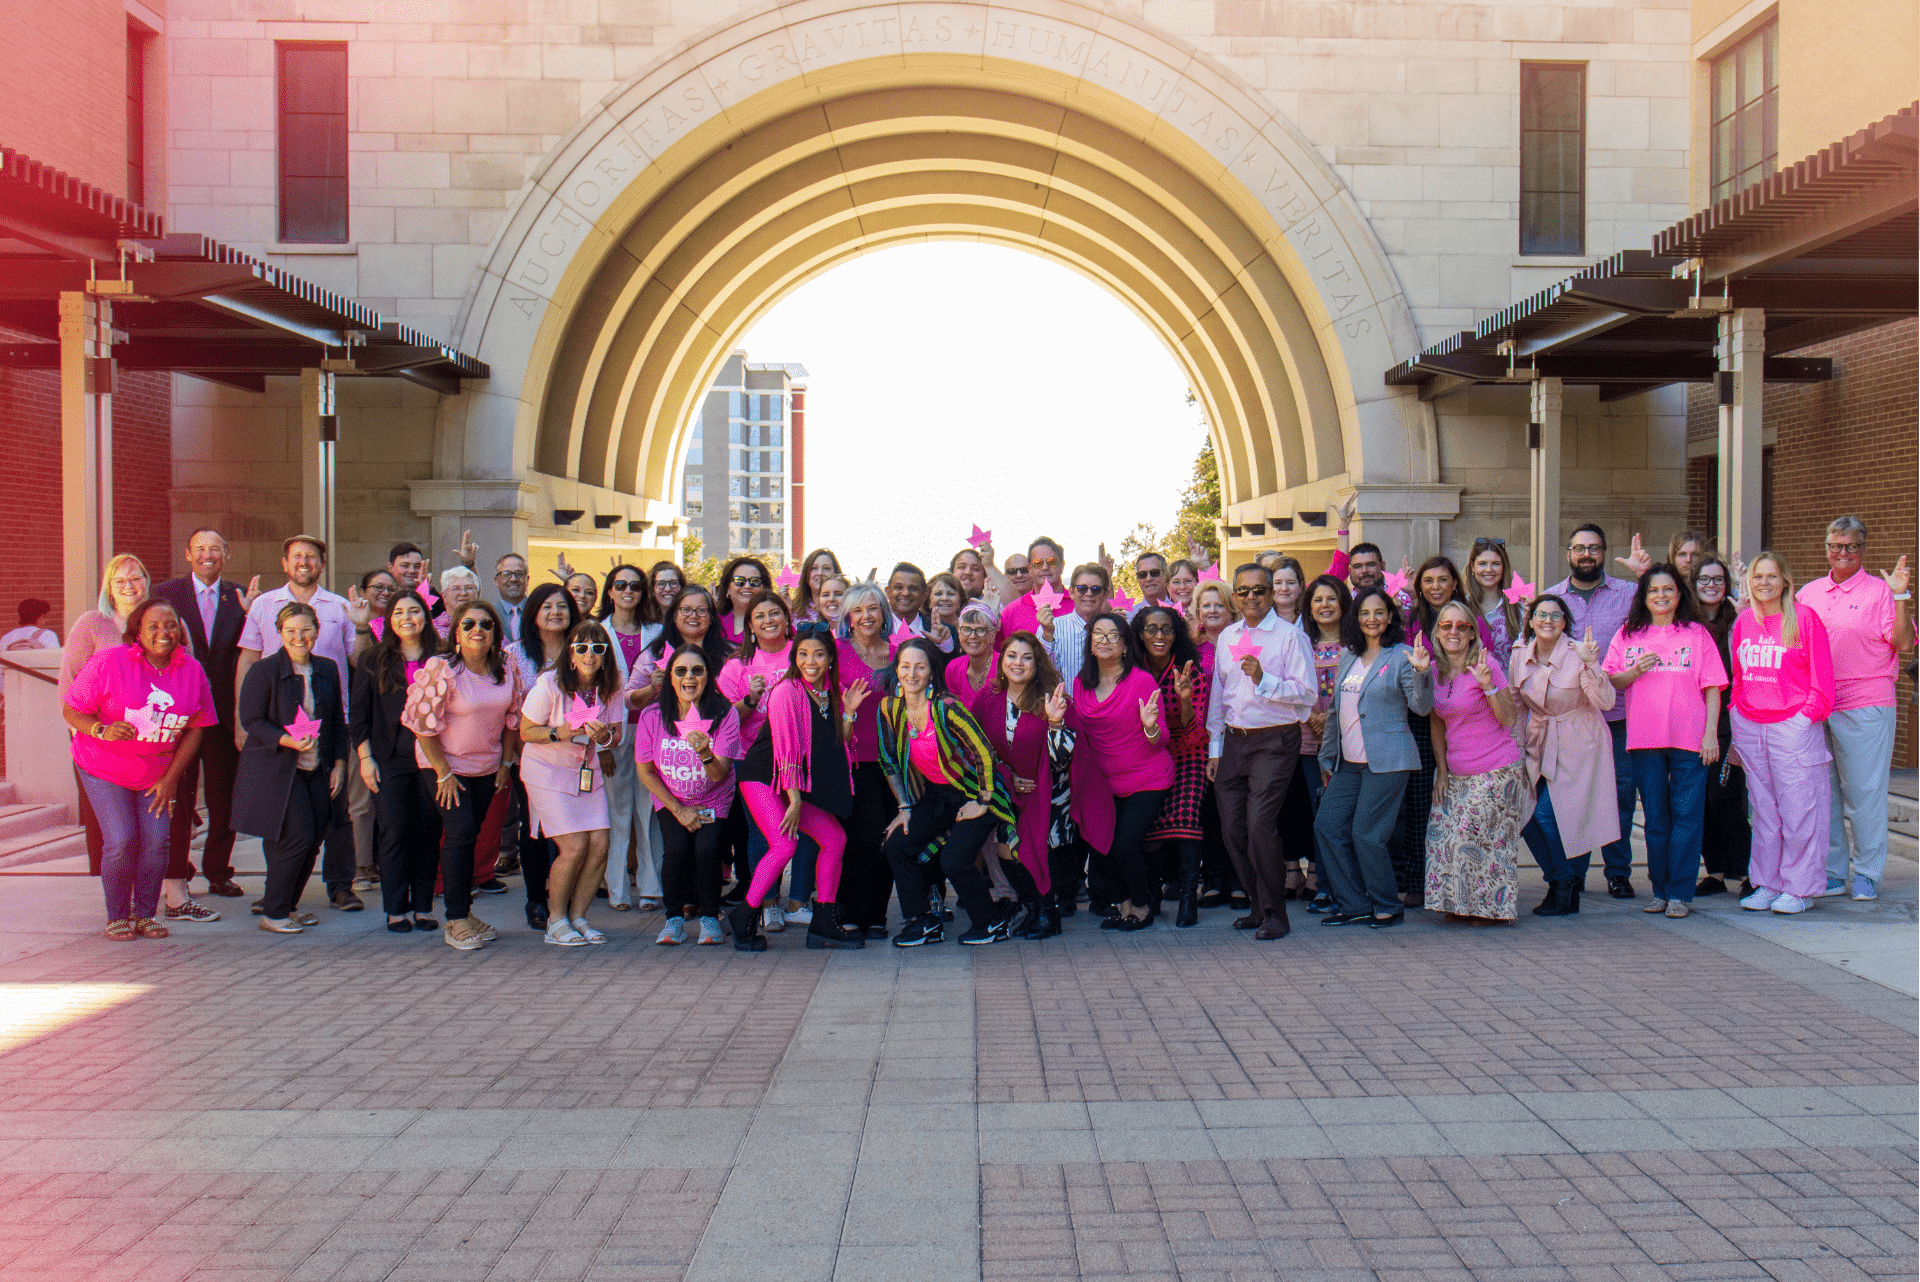 A group of employees posing in front of the Arch in pink.